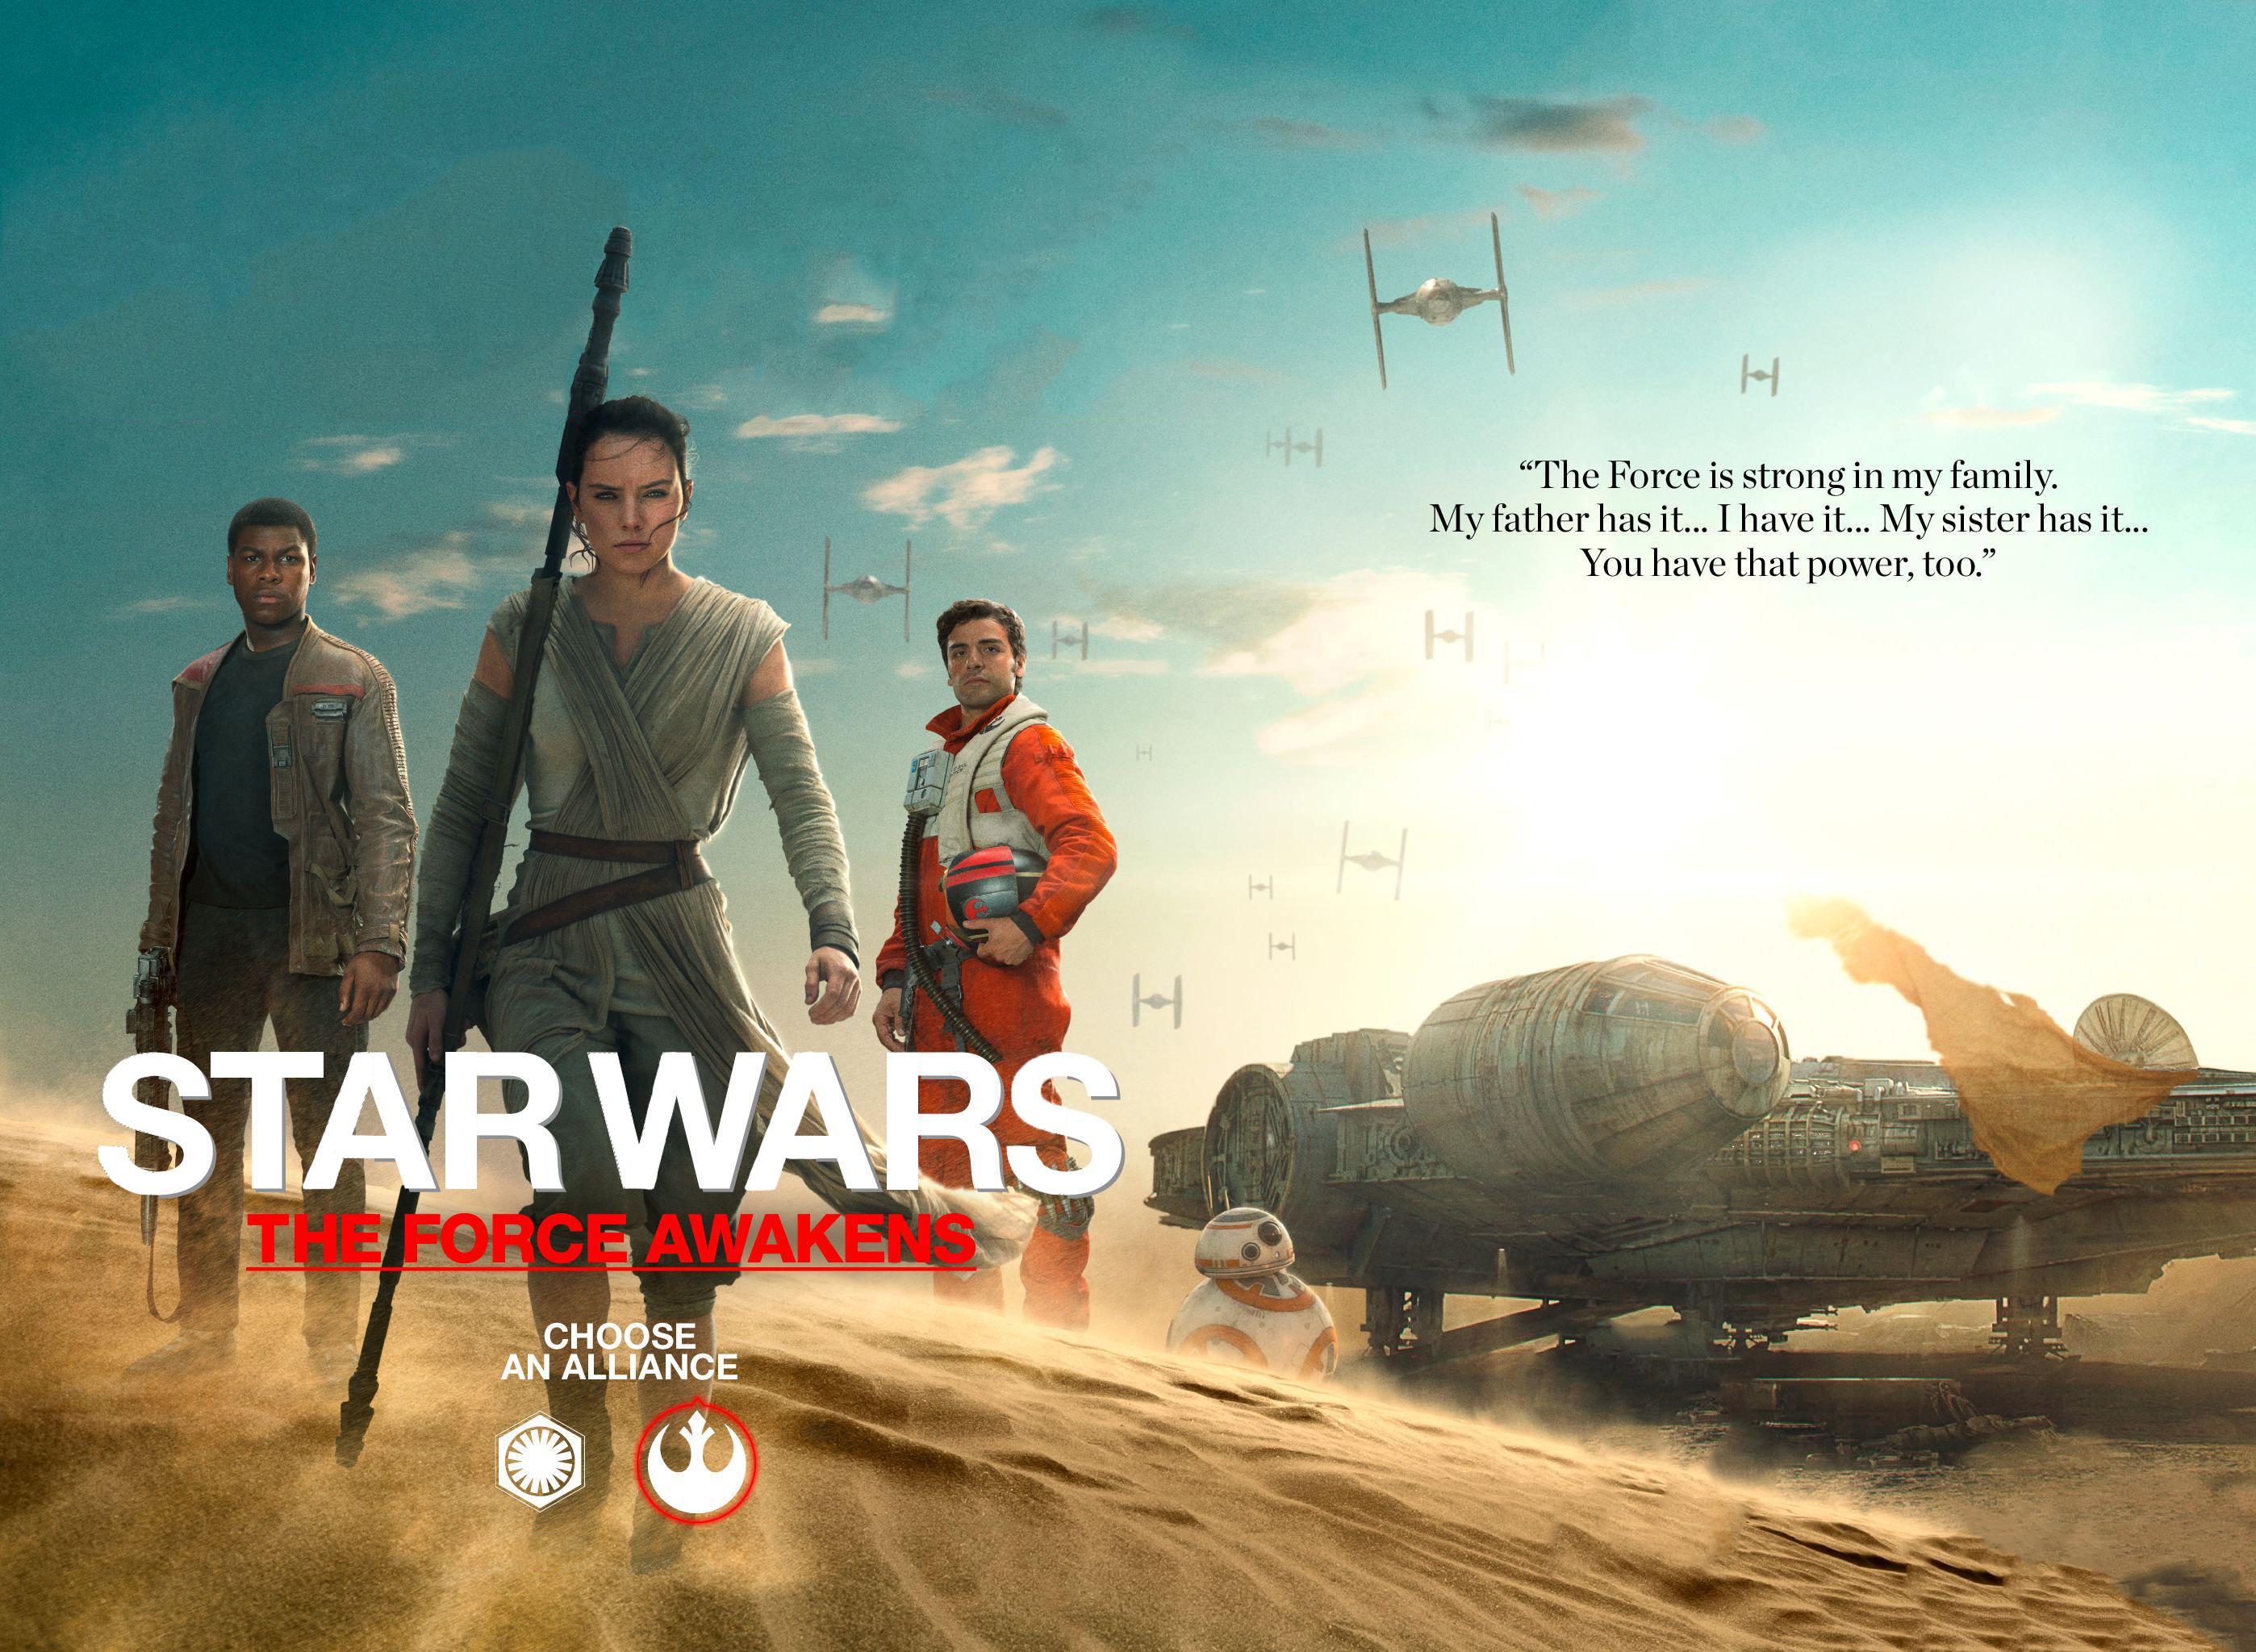 Star Wars The Force Awakens Empire Magazine Covers Wallpaper